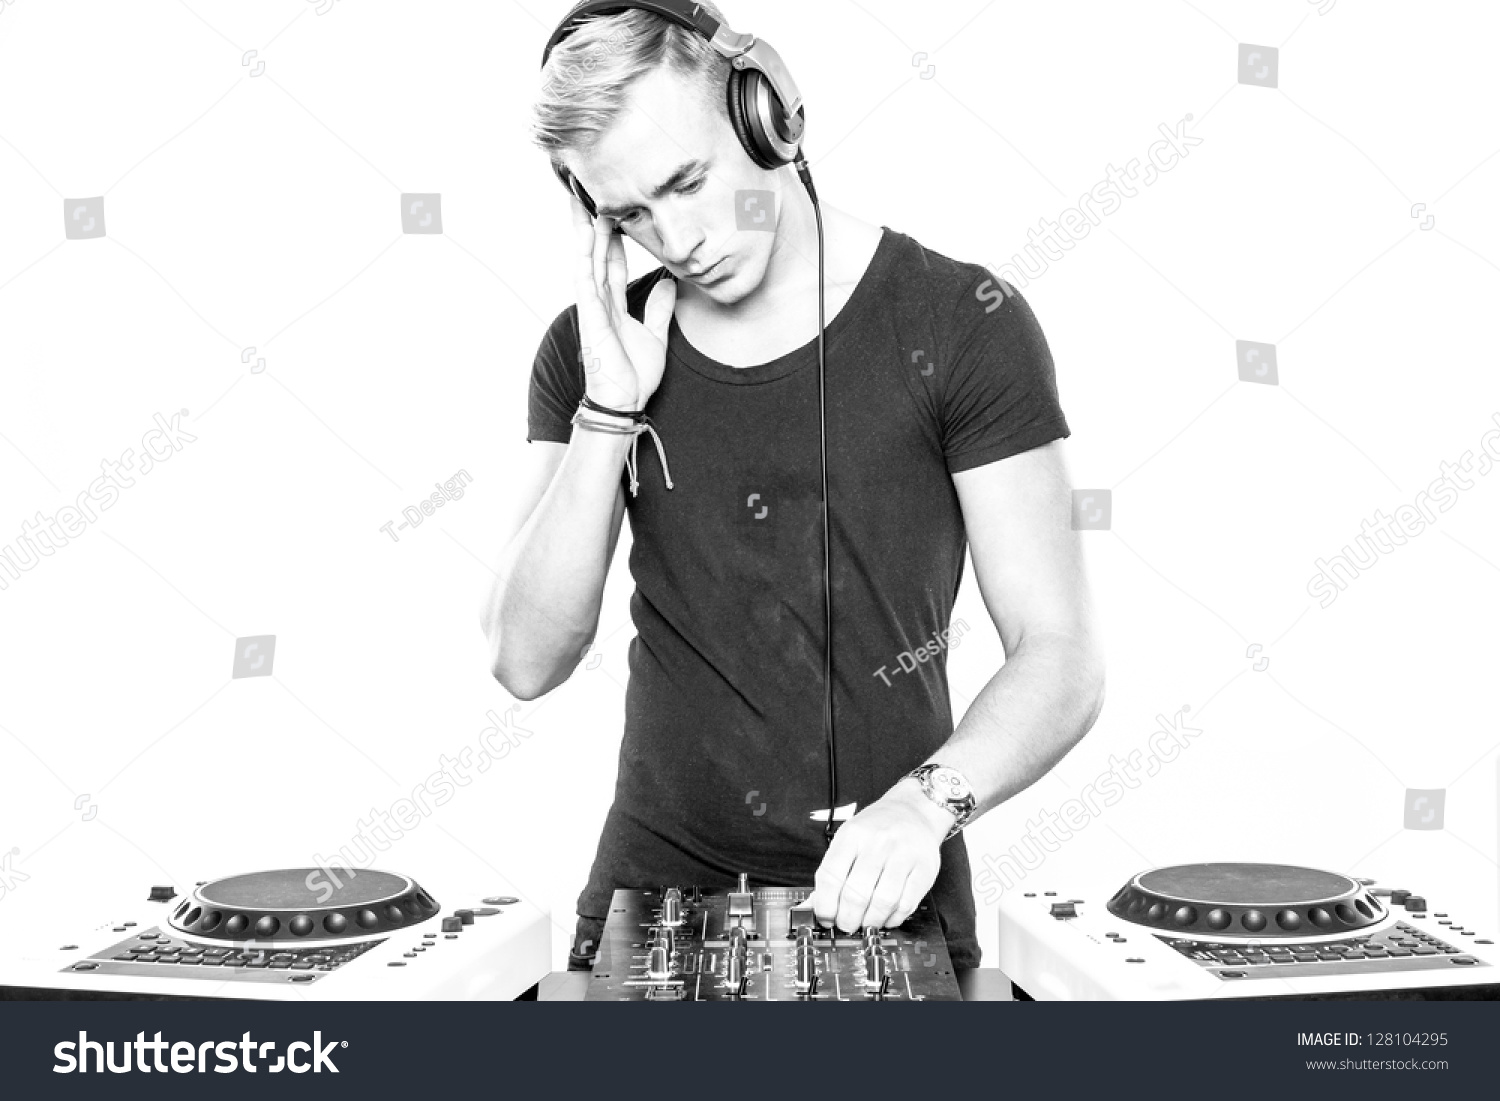 DJ at work in front of white background #128104295